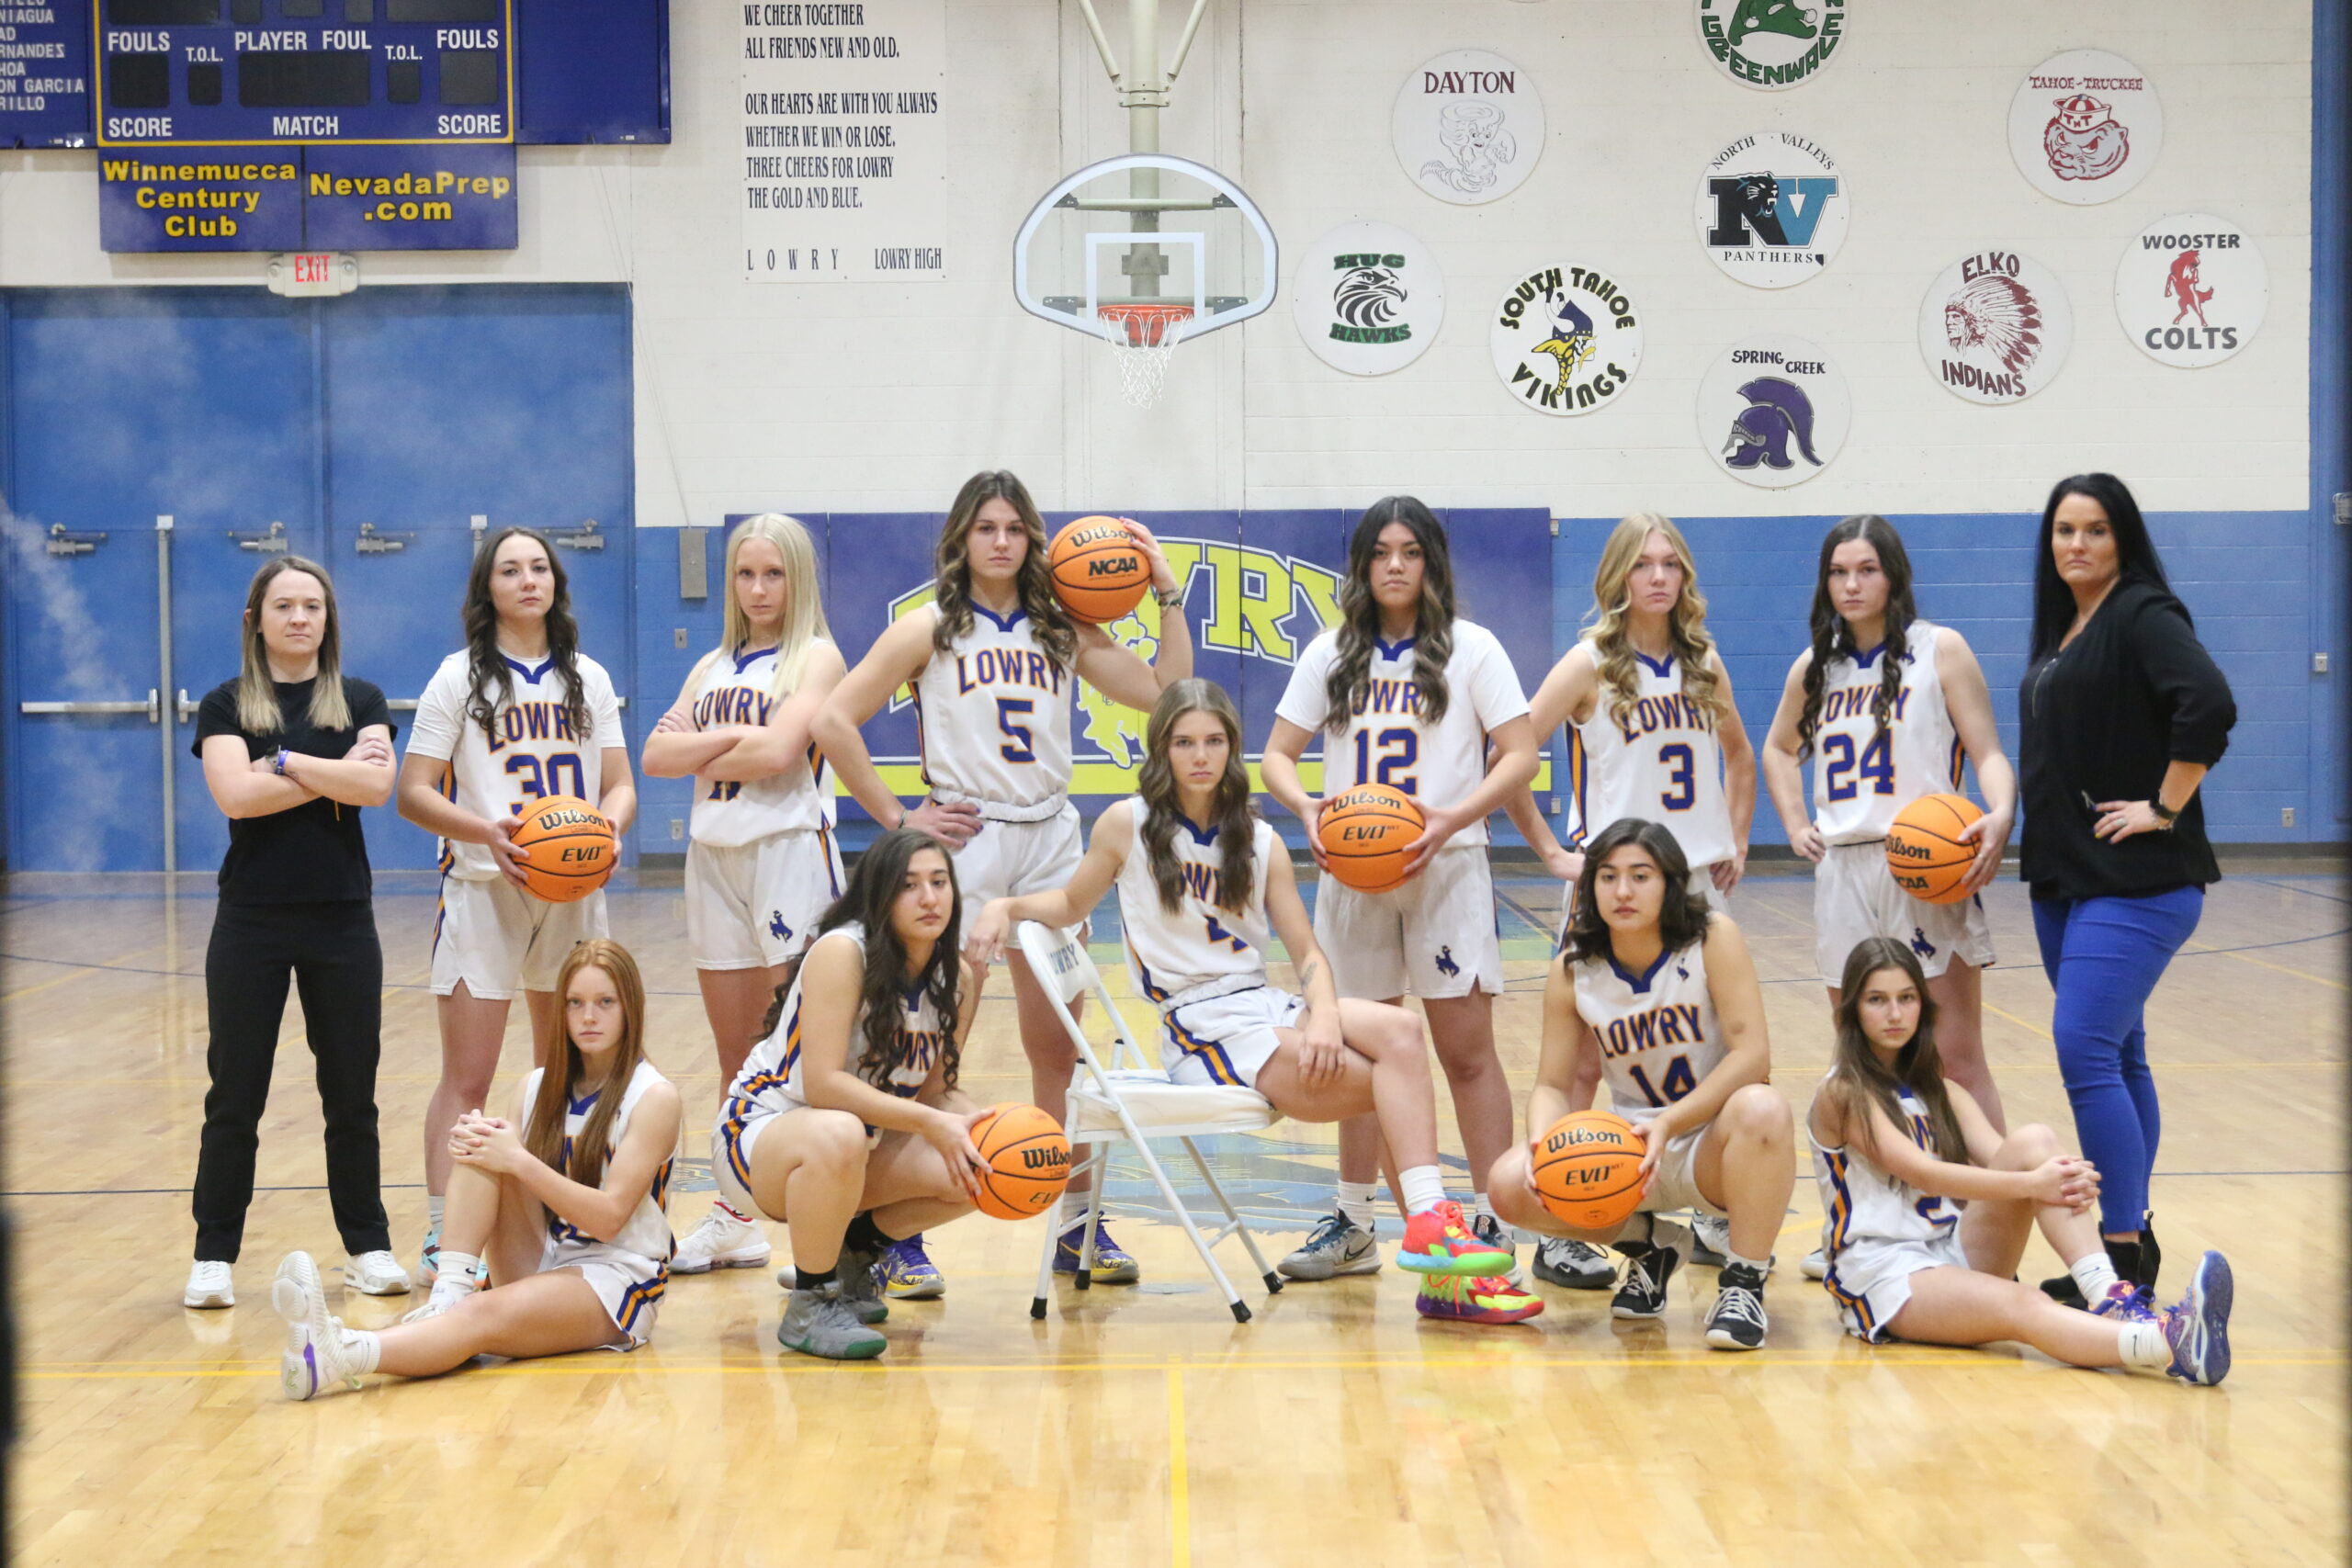 Varsity girl’s basketball team has to defend their title